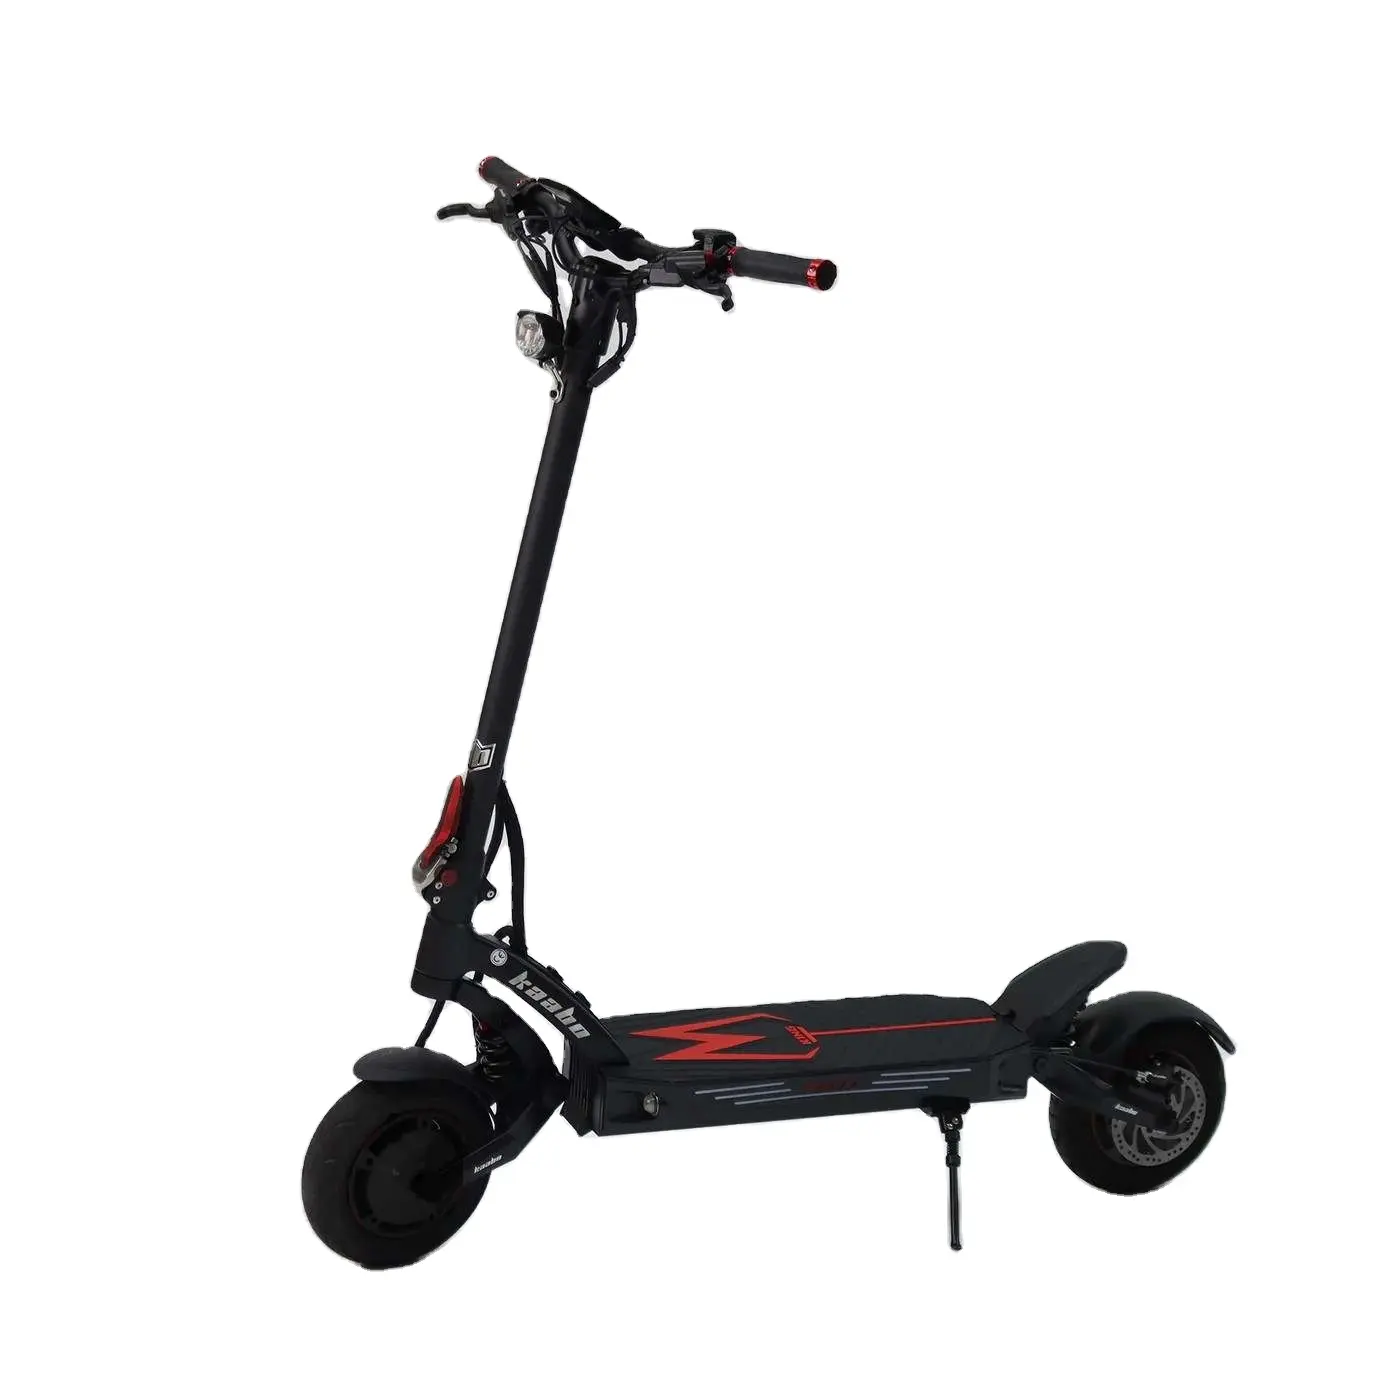 New hot sale Max speed 70kmh kaboo mantis pro electrical with lithium battery